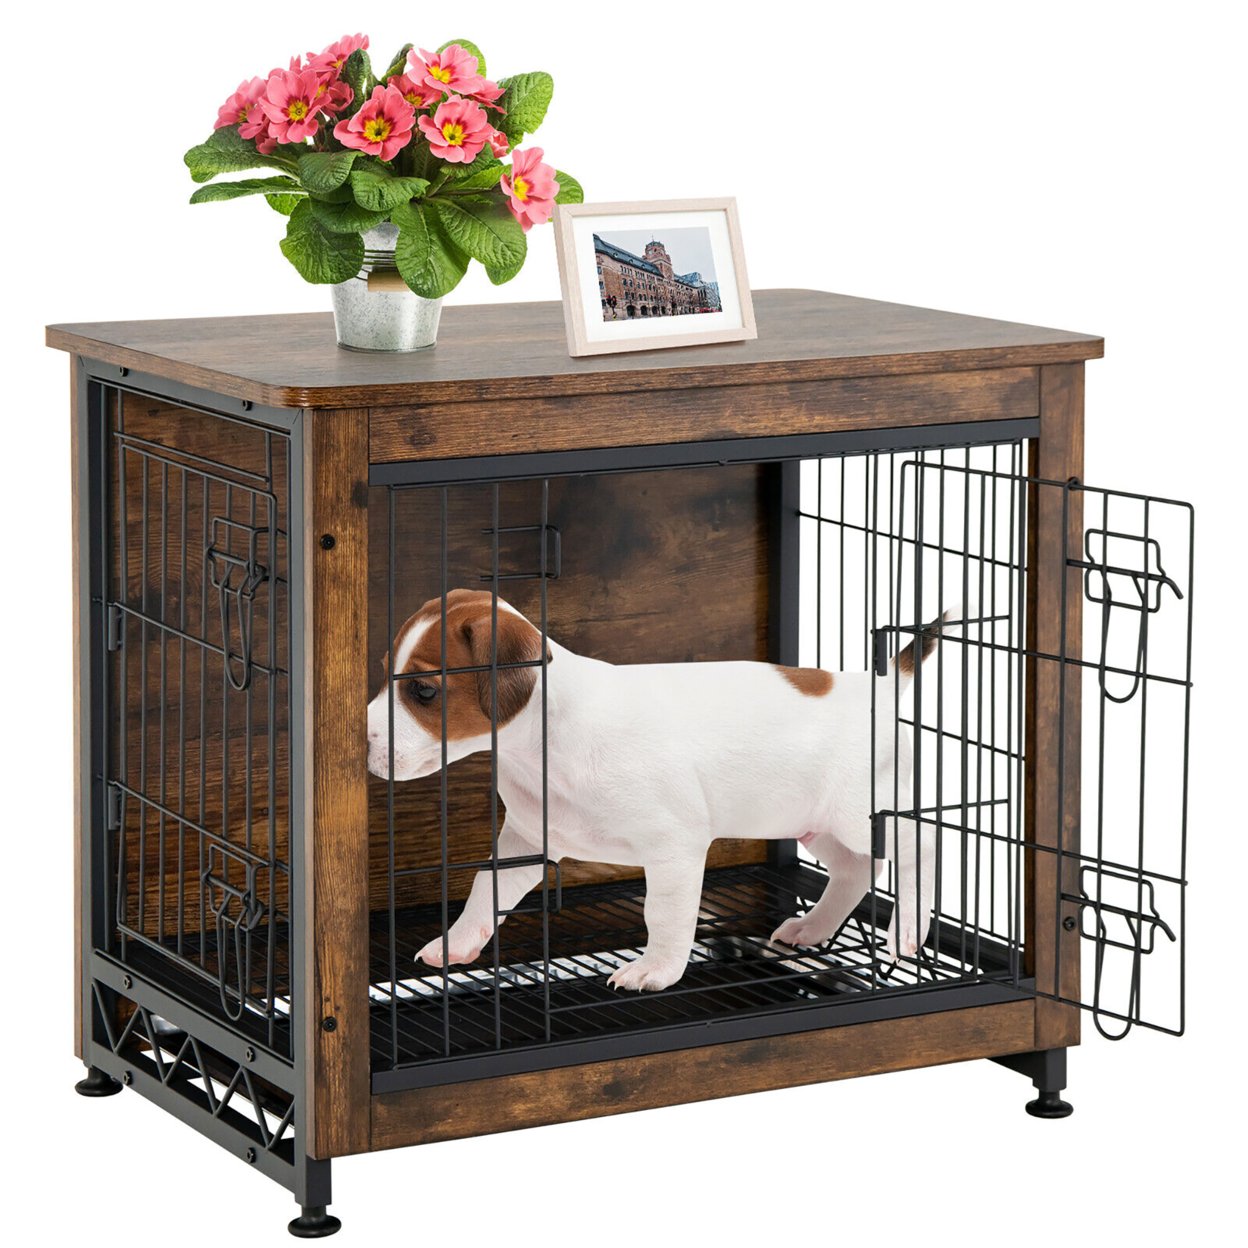 Wooden Dog Crate Furniture With Tray Double Door Dog Kennels End Table